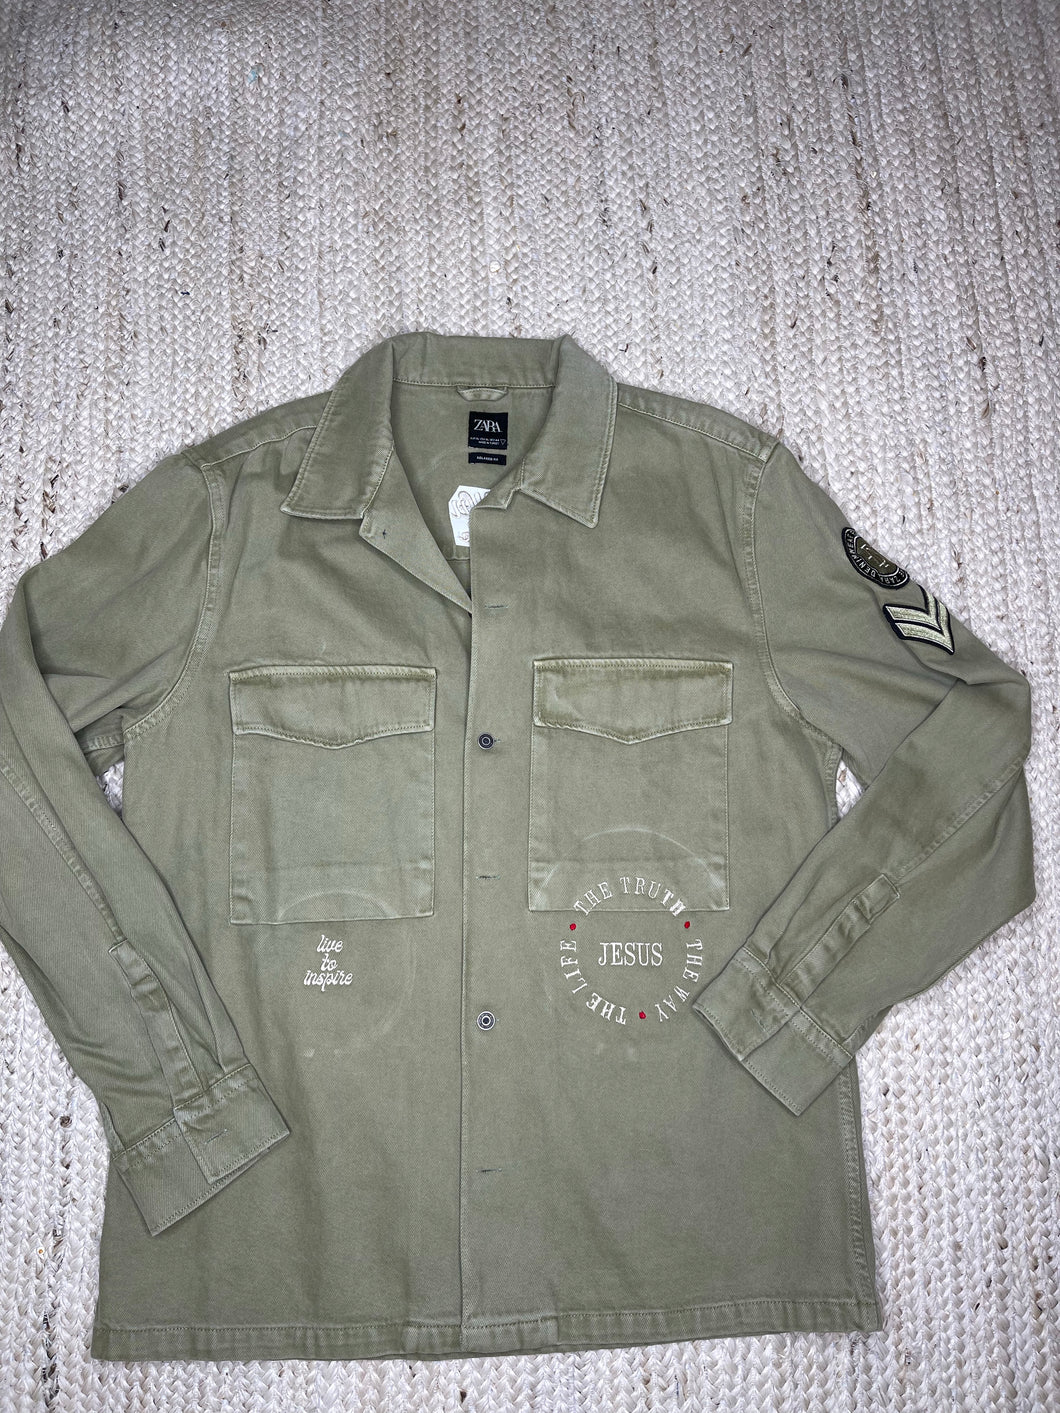 Wtl.co green patched shirts